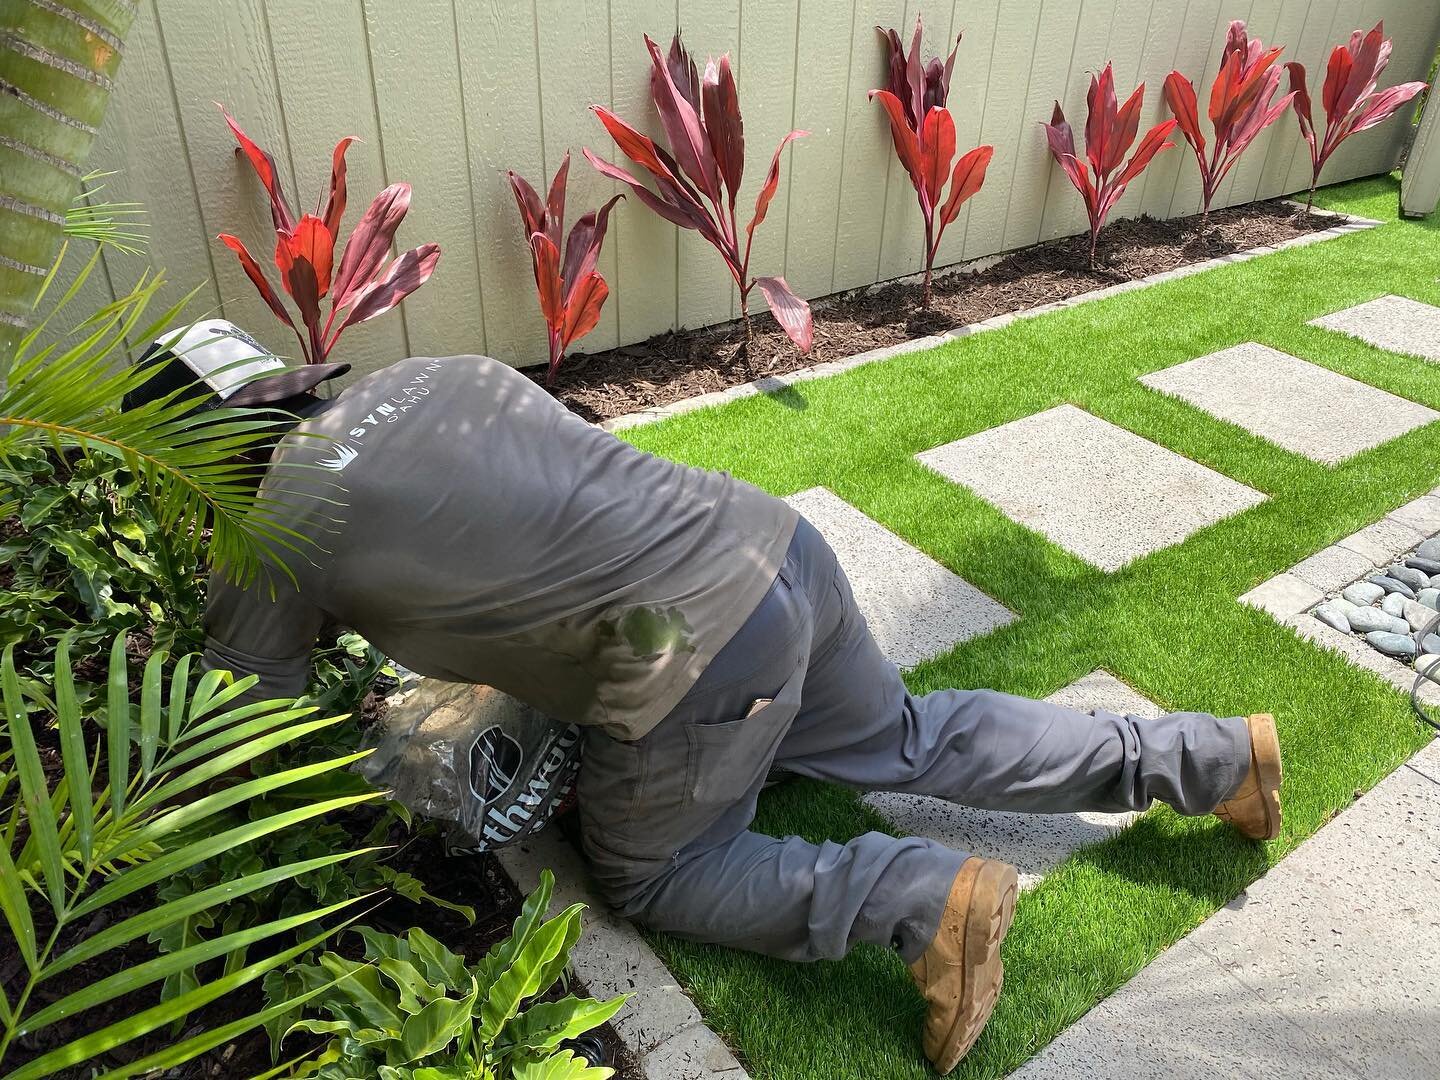 Finishing touches 🧩 #5931864 #SYNlawnOahu#hawaiilandscaping #SyntheticTurf #ArtificialGrass #Turf #Grass #SynLawn #lifetimewarranty #biobasedproducts #savewater #savetime #getyourweekendsback #alohaeveryday